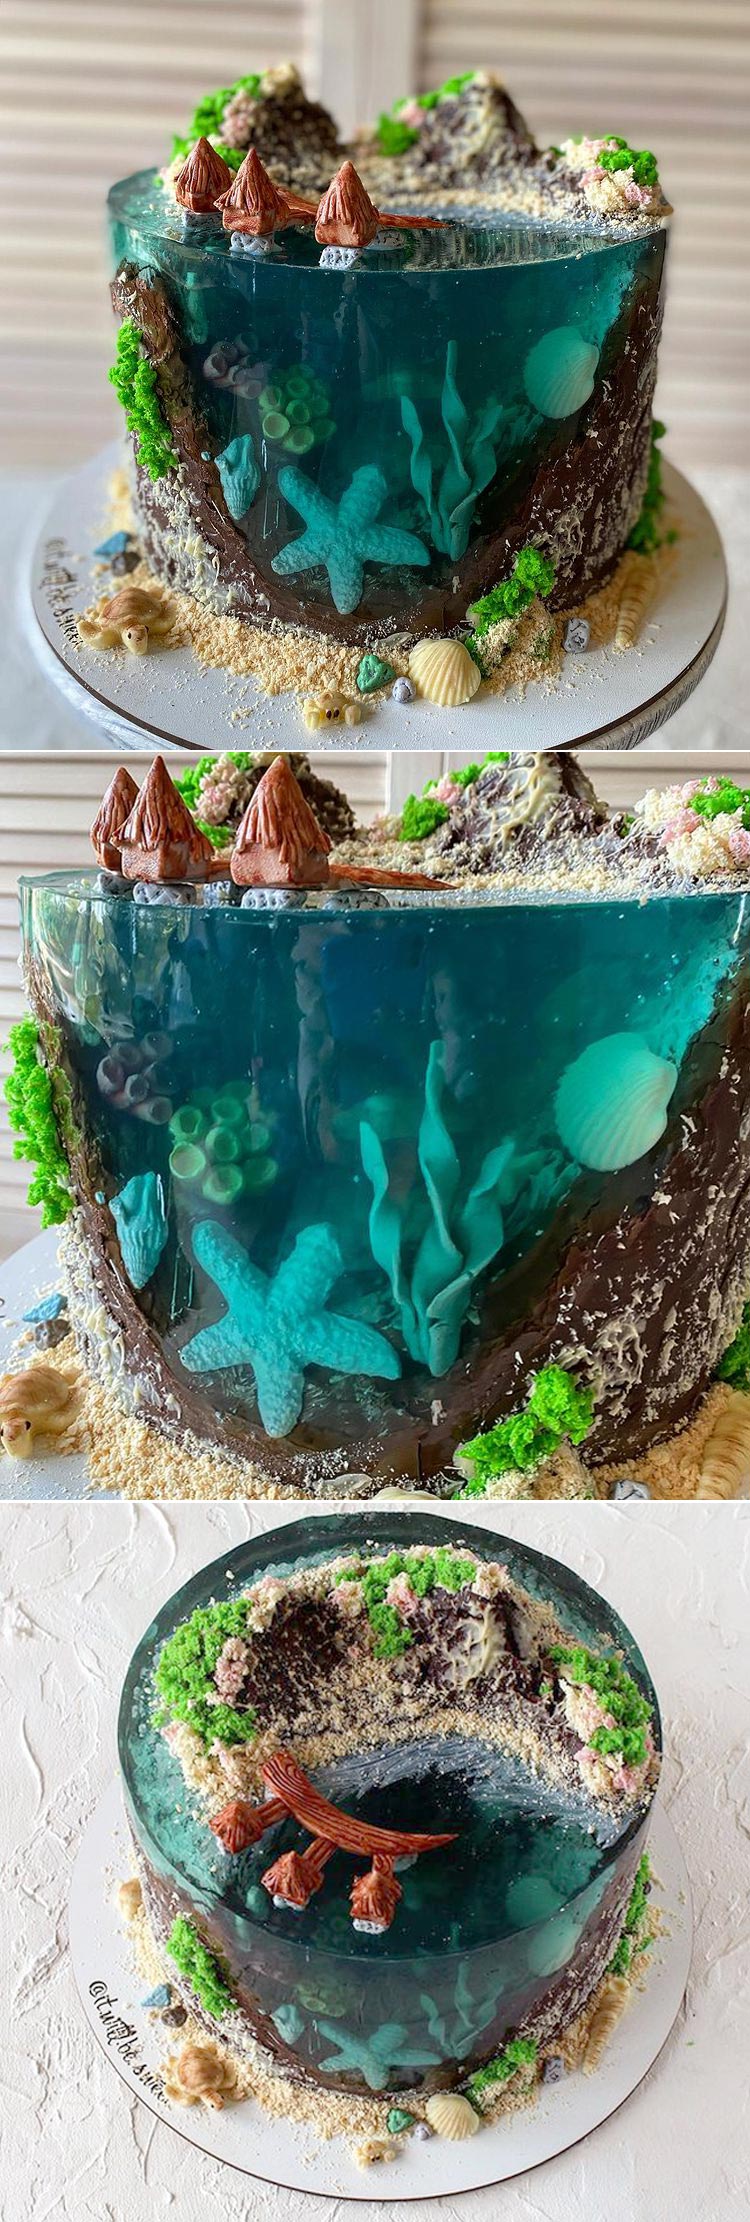 Island Cake or Island Jelly Cake by it.will.be.sweet